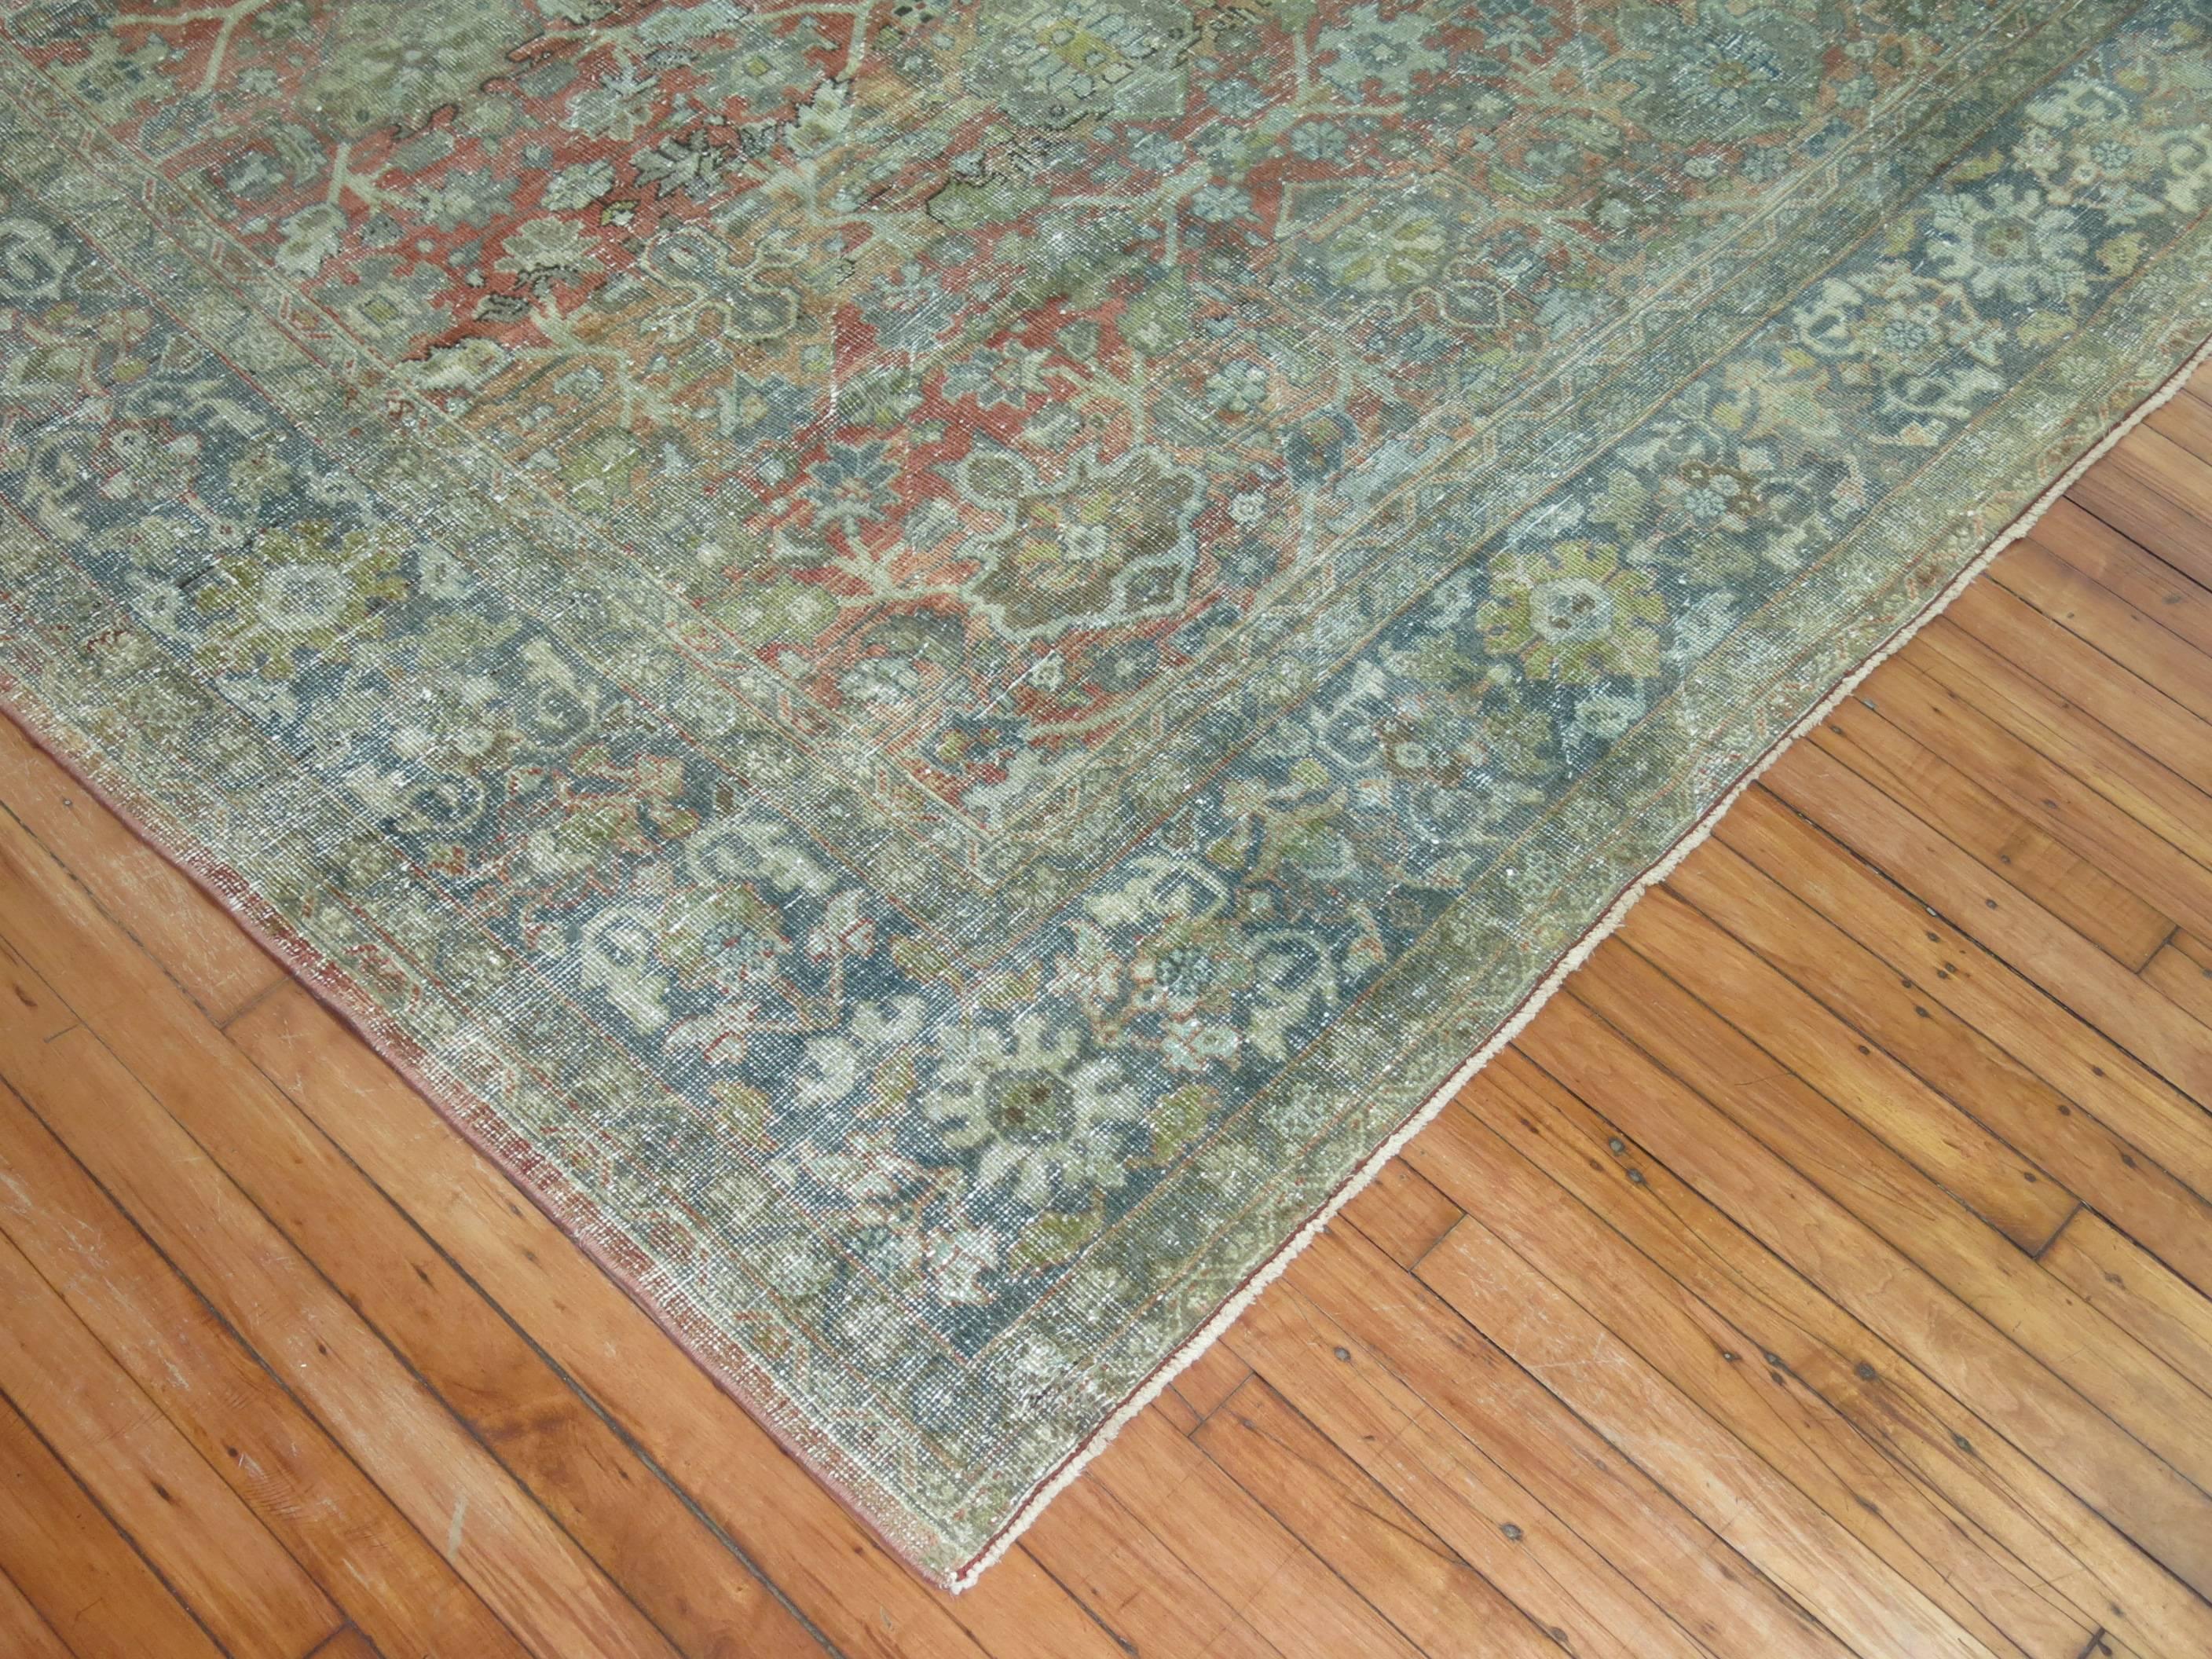 20th Century Shabby Chic Persian Traditional Mahal Rug In Terracotta and Sea Foam Tones